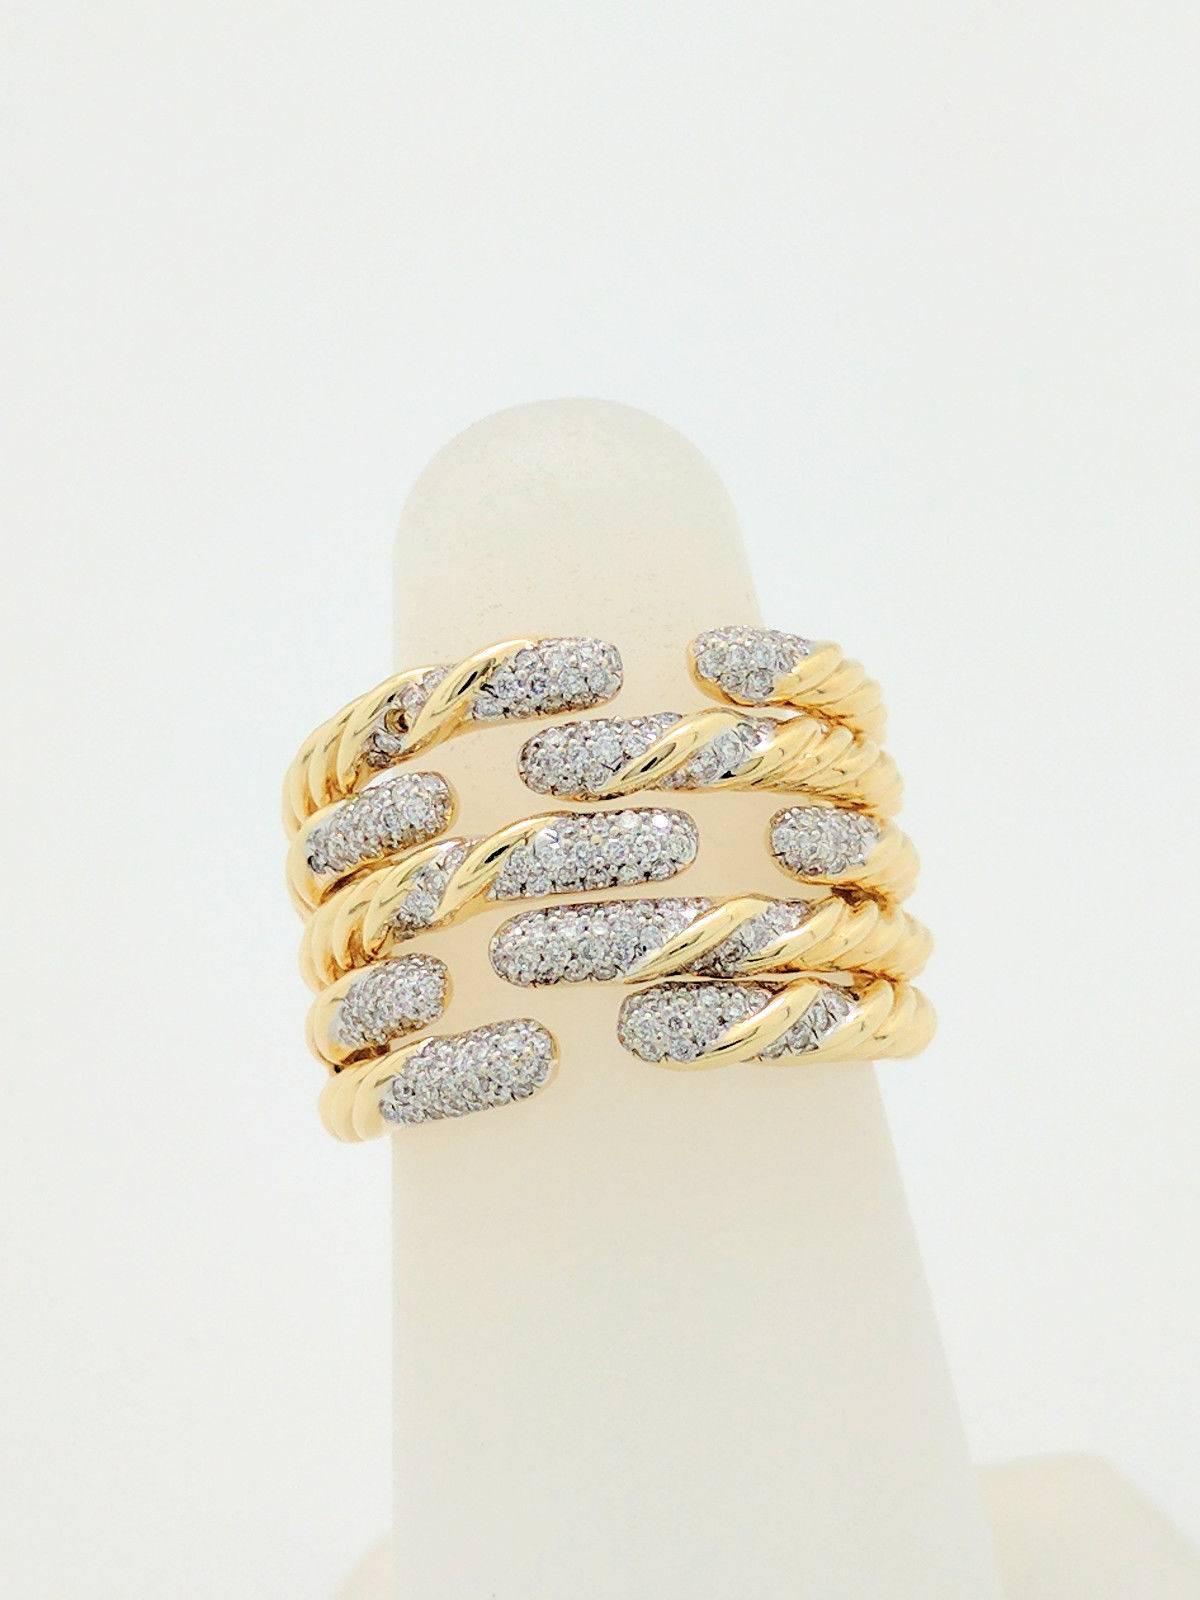 You are viewing a beautiful David Yurman five-row ring with pave diamonds from the Willow Collection.

This gorgeous David Yurman 18k yellow gold and pave diamond ring features a unique open design with .64ctw of pave diamonds. Retail price is